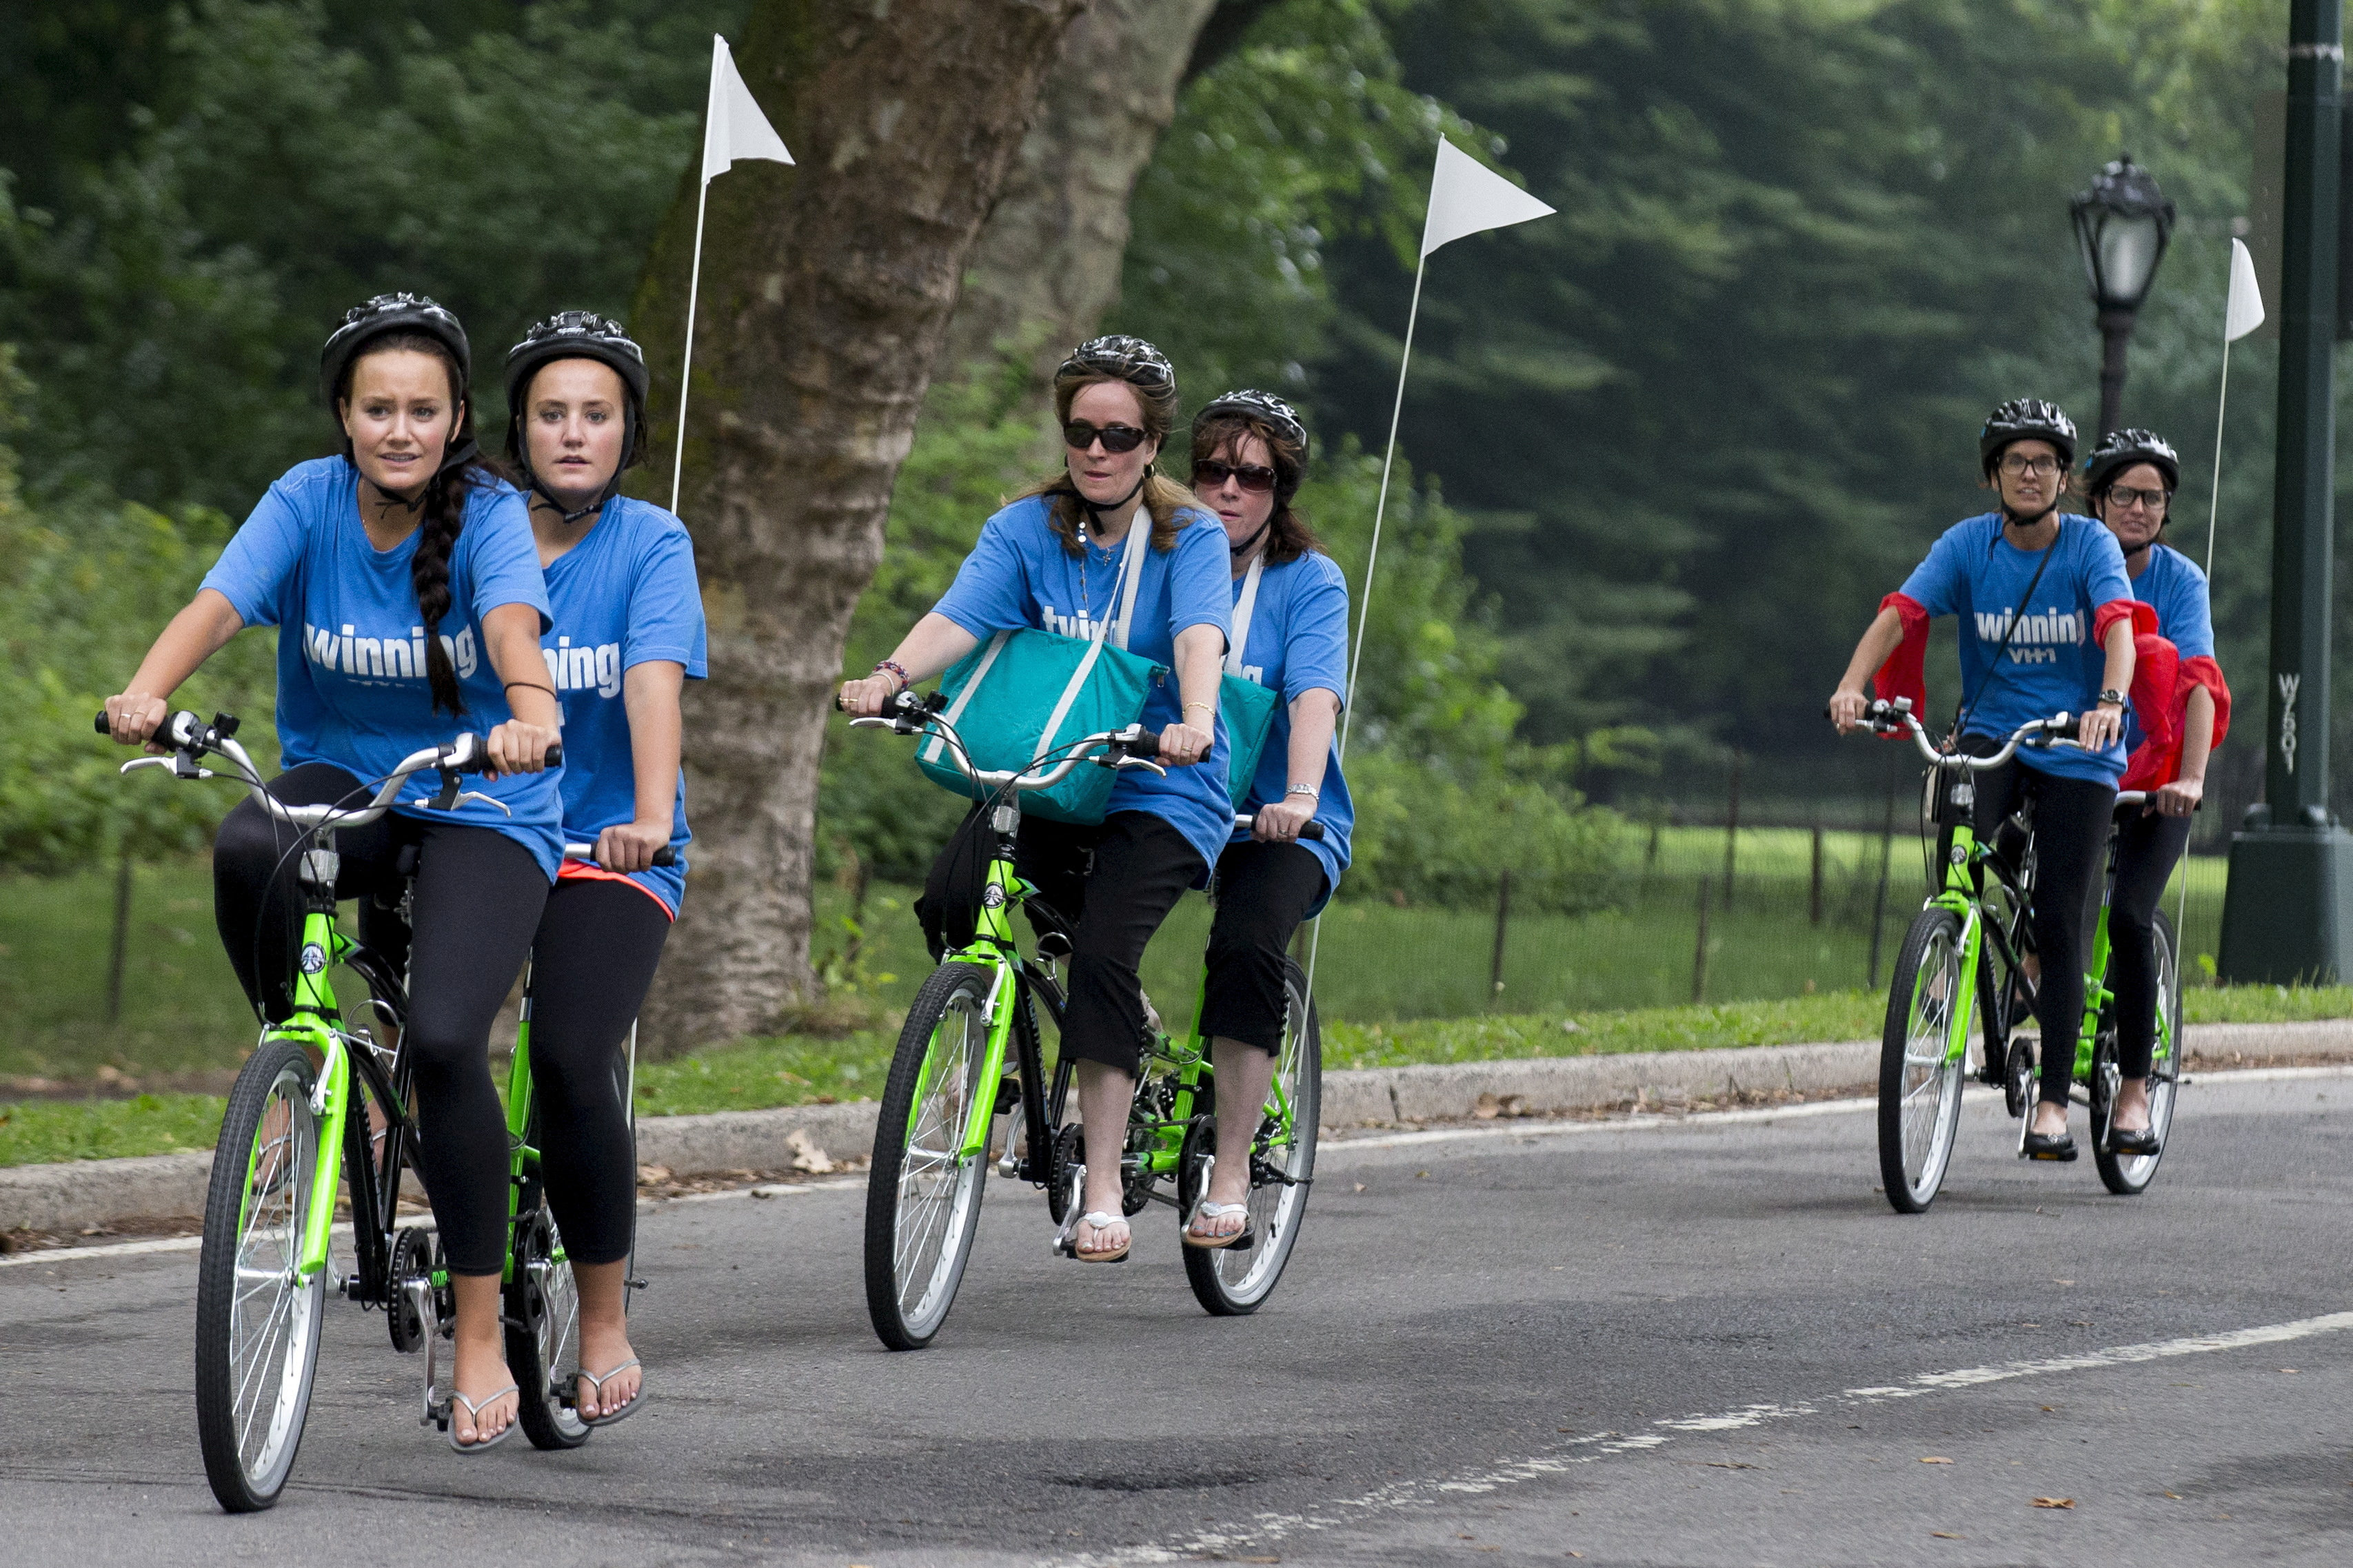 Sets of twins ride on tandem bicycles in New York's Central Park